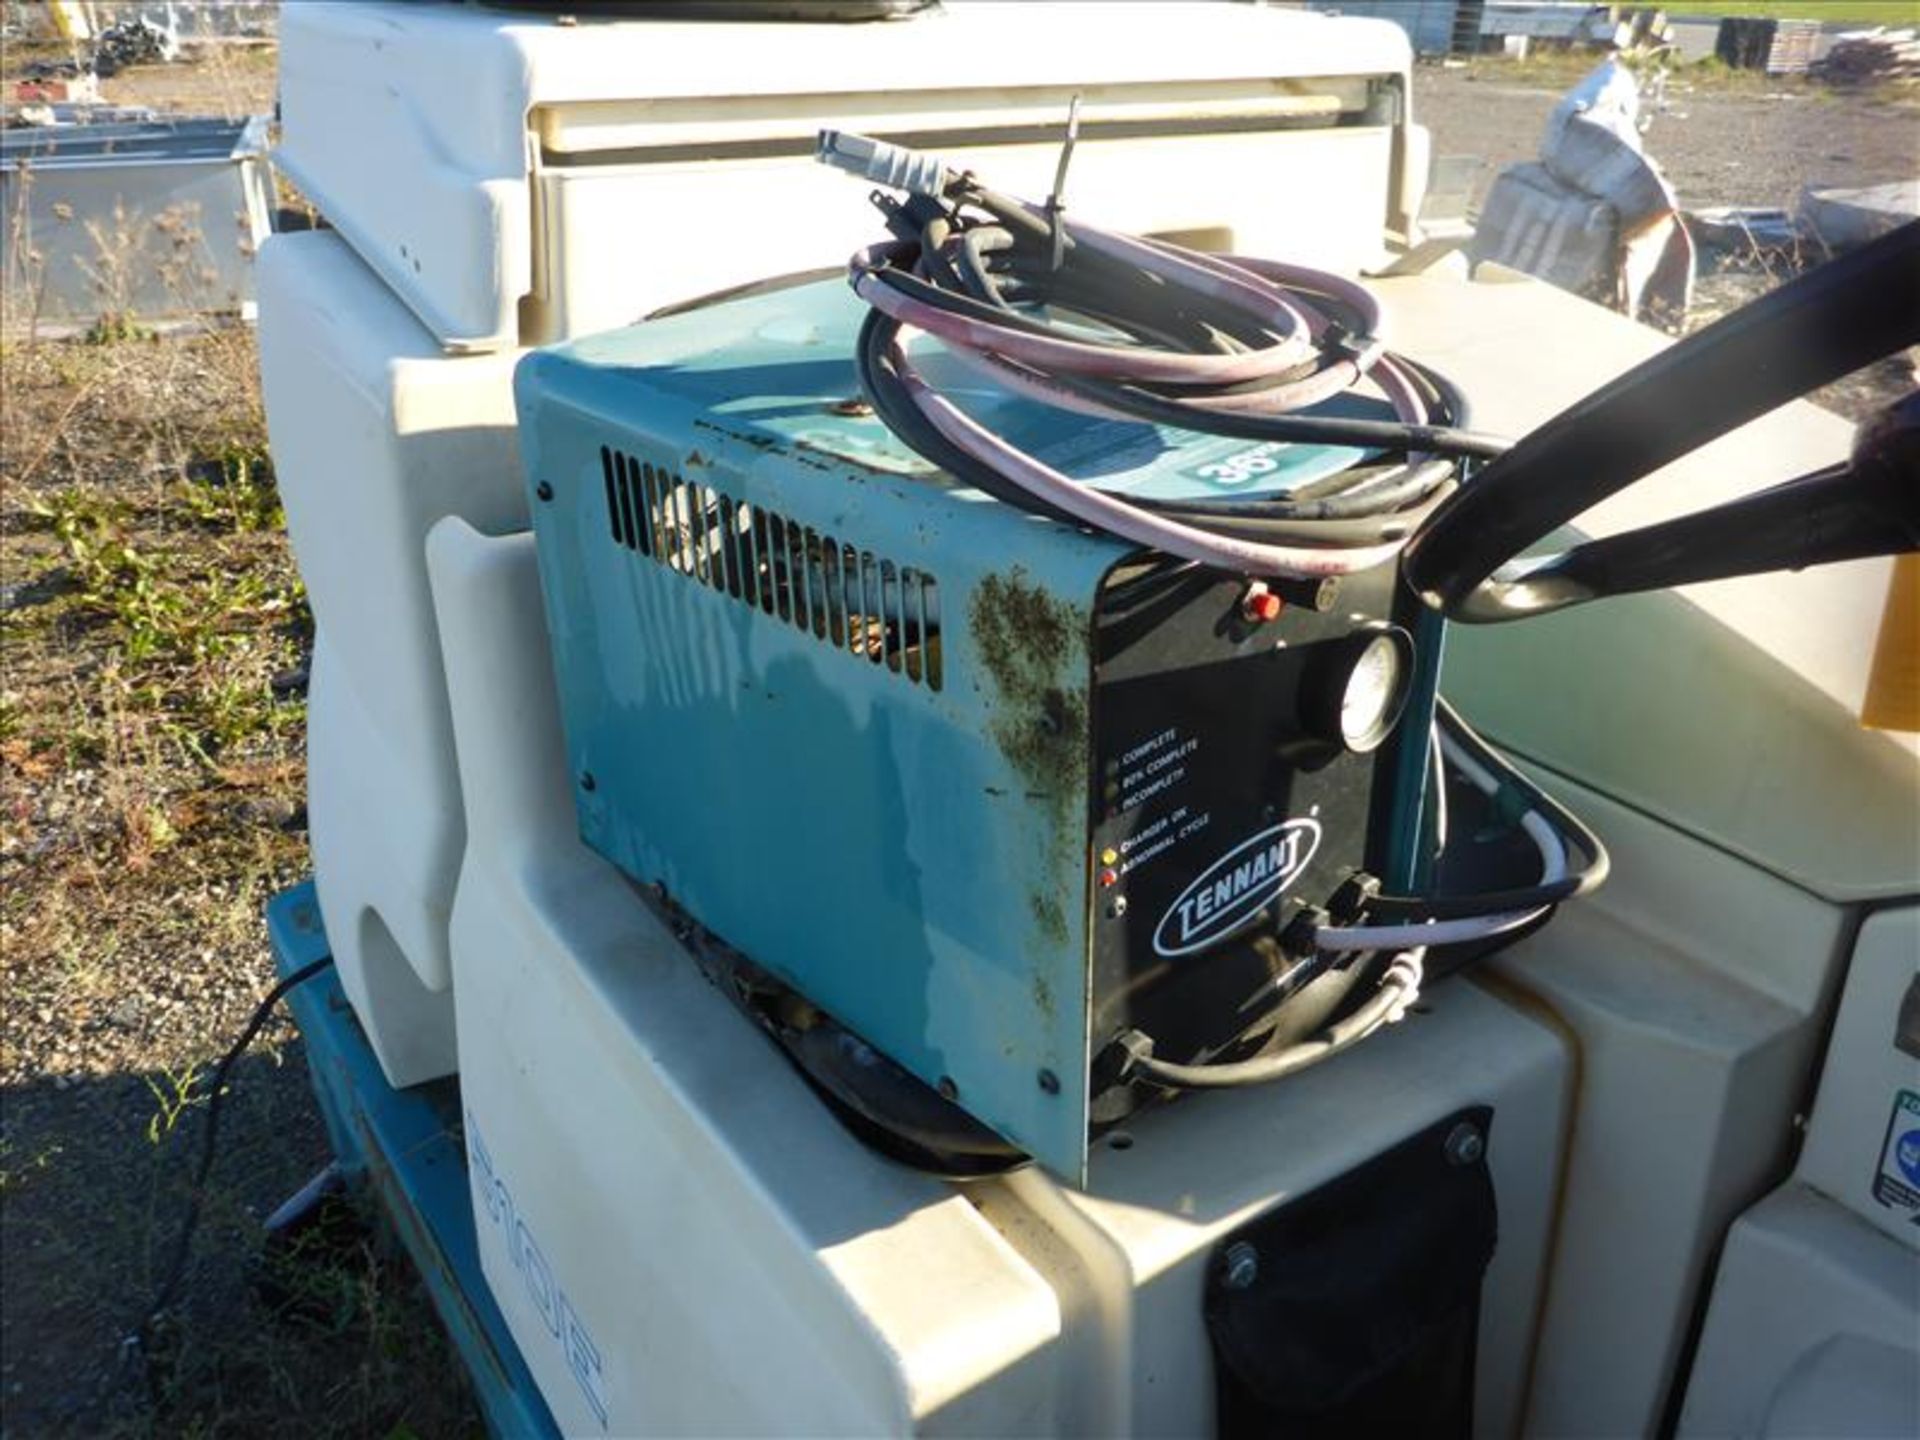 Tennant 510E riding sweeper w/ battery charger s.n. 510-2599 (May Need Repair) (Tag No. 1370) - Image 3 of 6